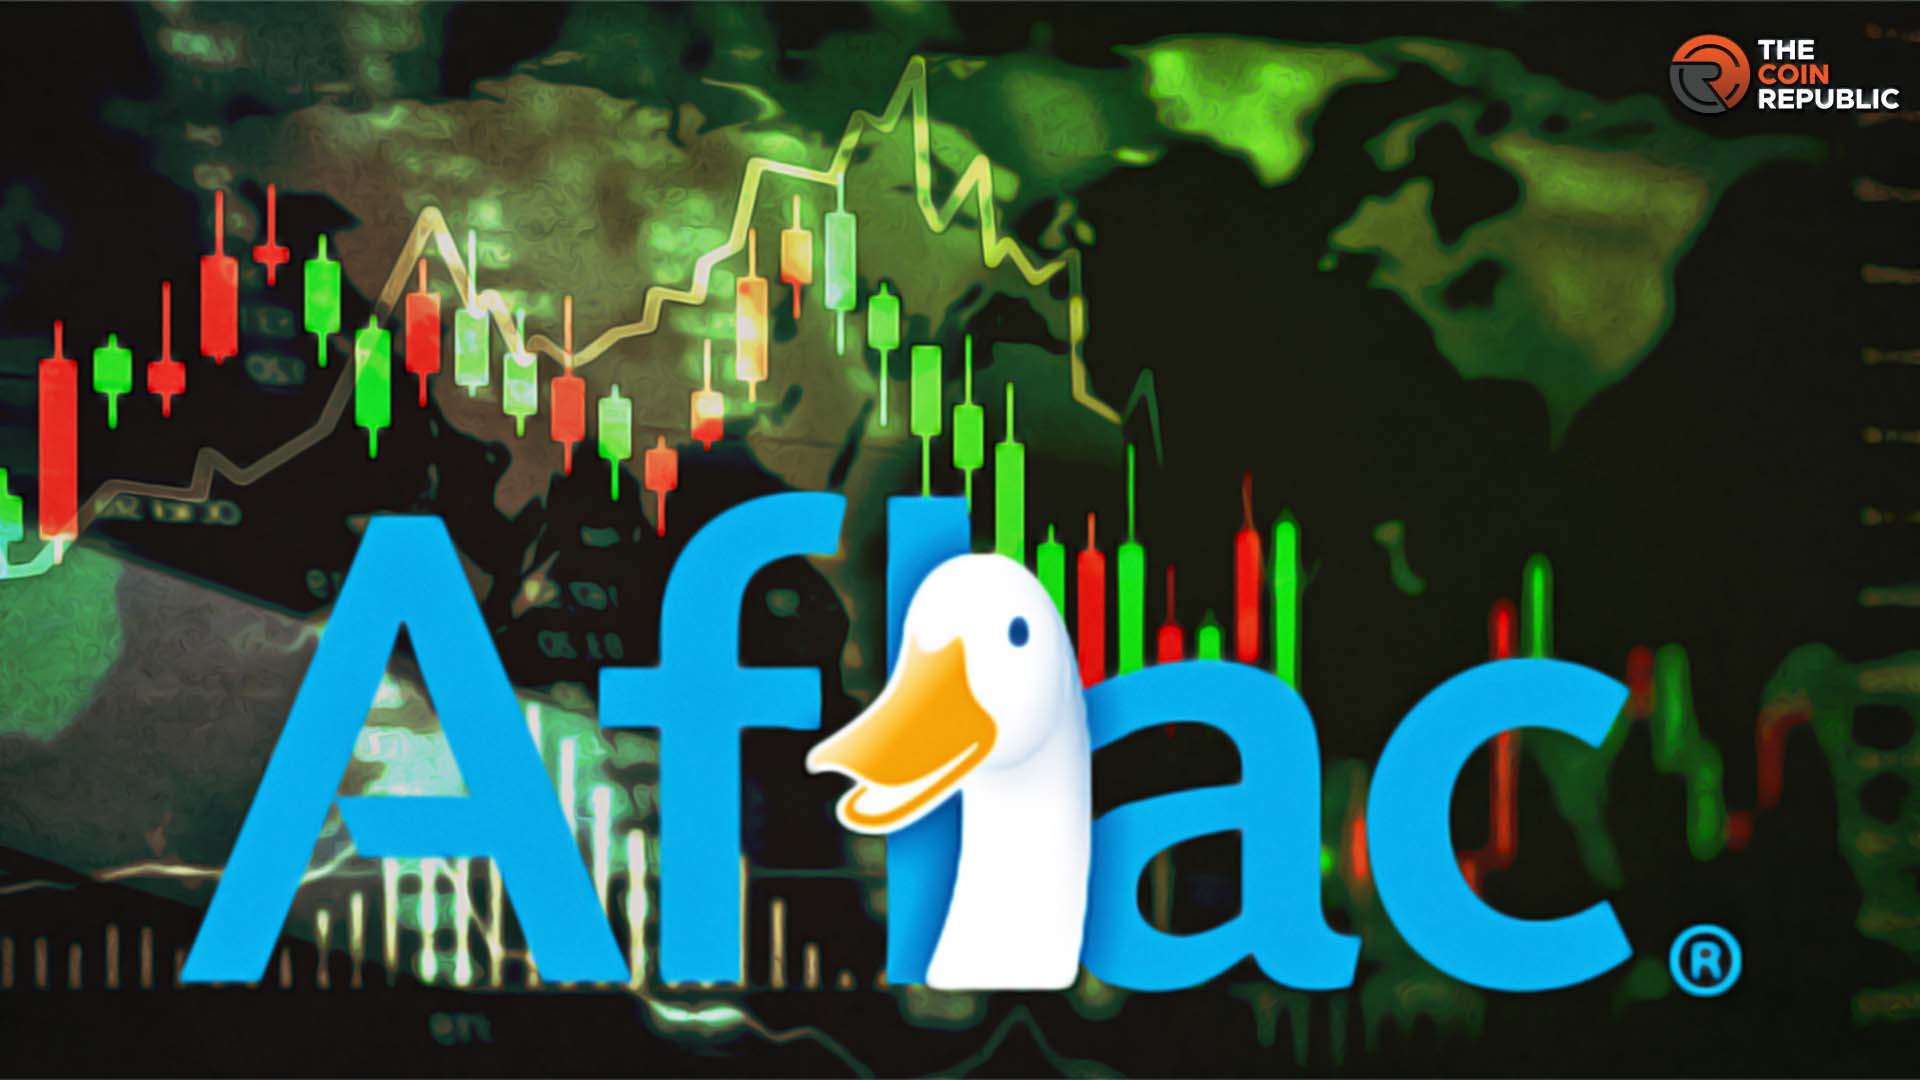 AFLAC Stock (NYSE: AFL) Rally Persists, Will Bulls Attain $100?